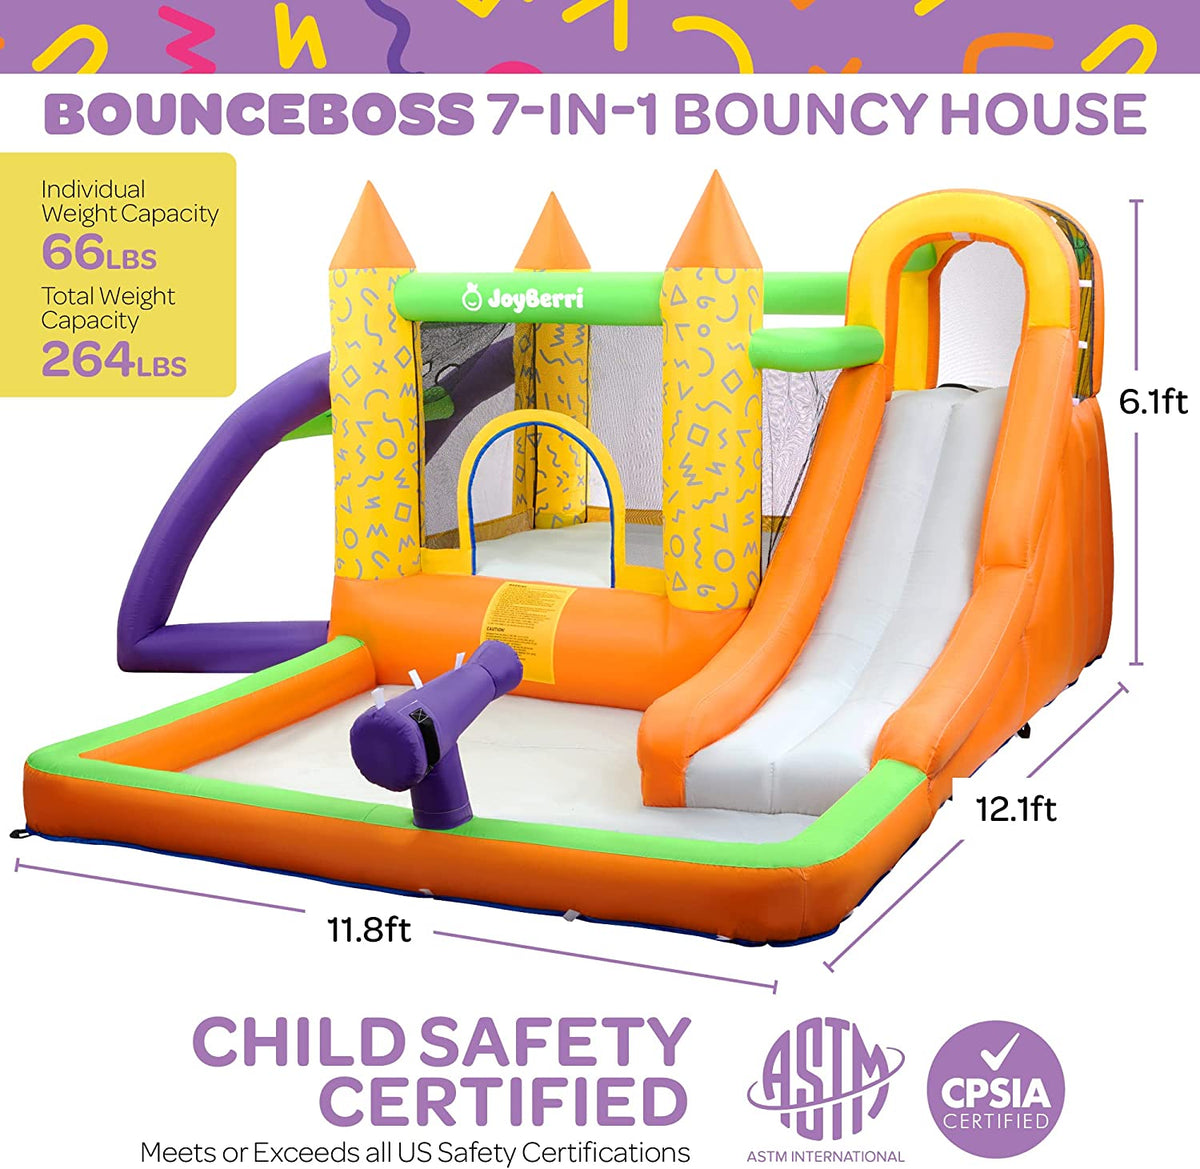 BounceBoss™ Waterslide - Inflatable Water Bounce House with Water Slide, Trampoline, Splash Pool, Climbing Wall - Heavy Duty Bouncy House for Kids Outdoor - Includes Air Blower & Carry Bag